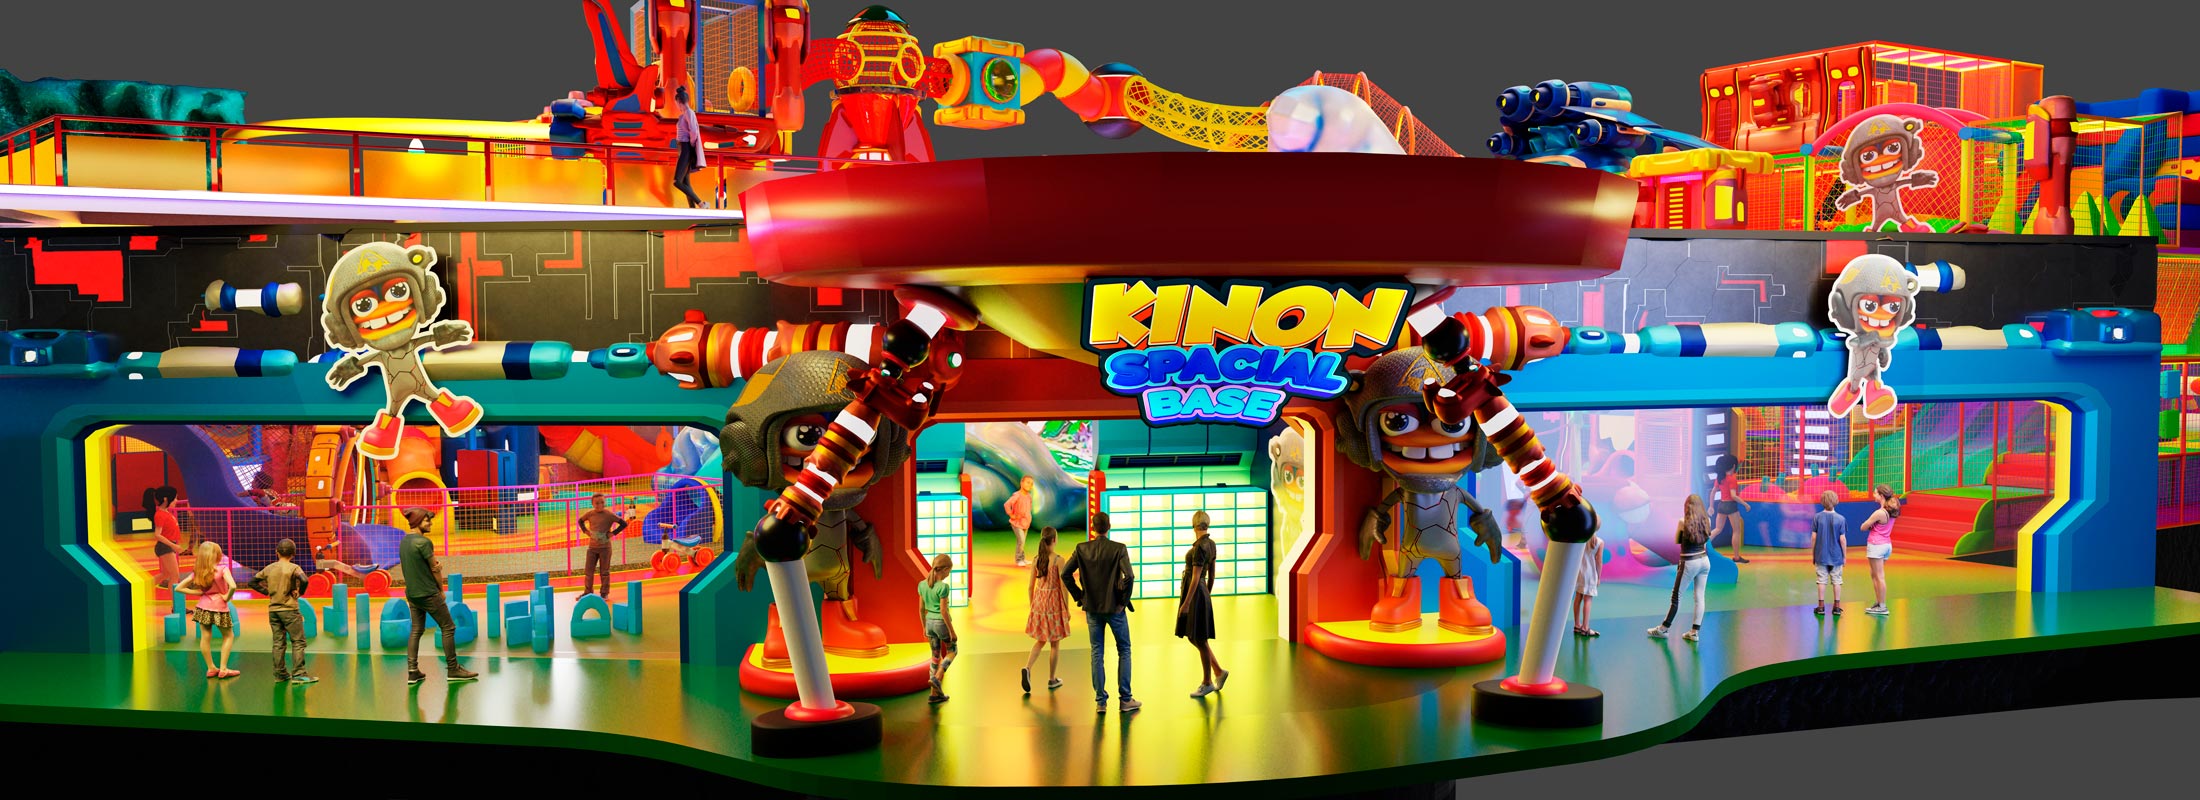 INDOOR THEME PARK DESIGN AND CONSTRUCTION